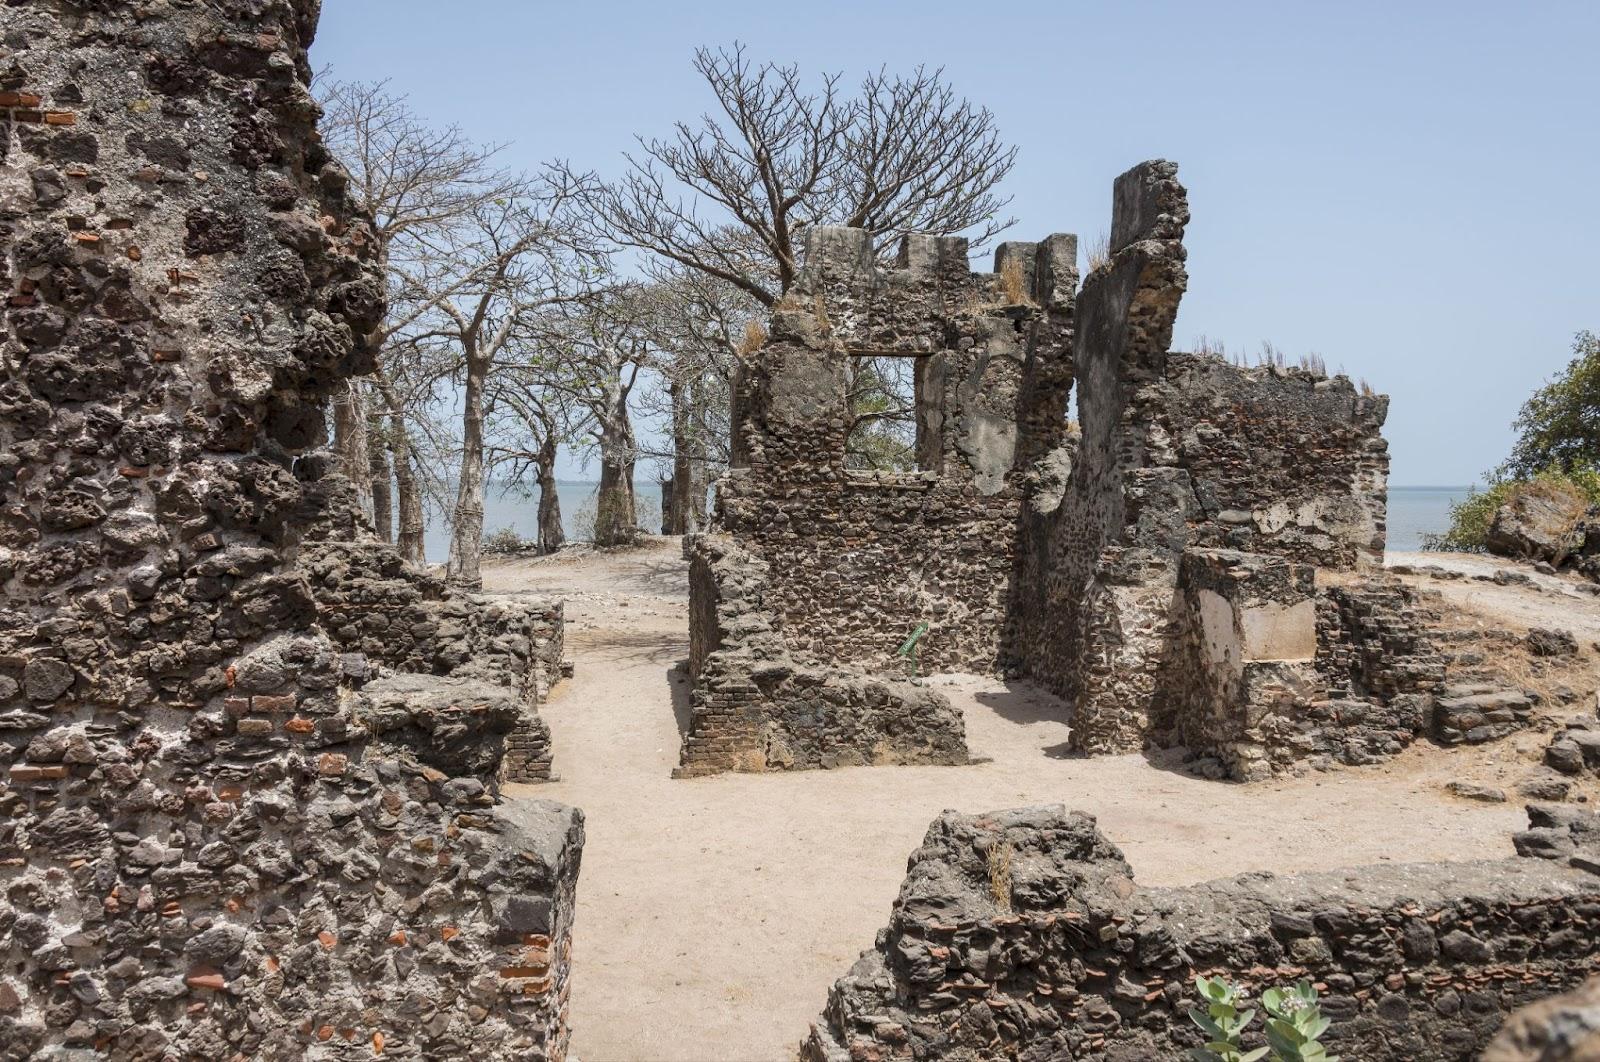 View of the ruined walls of the old fort, on James Island, on the Gambia river, West Africa